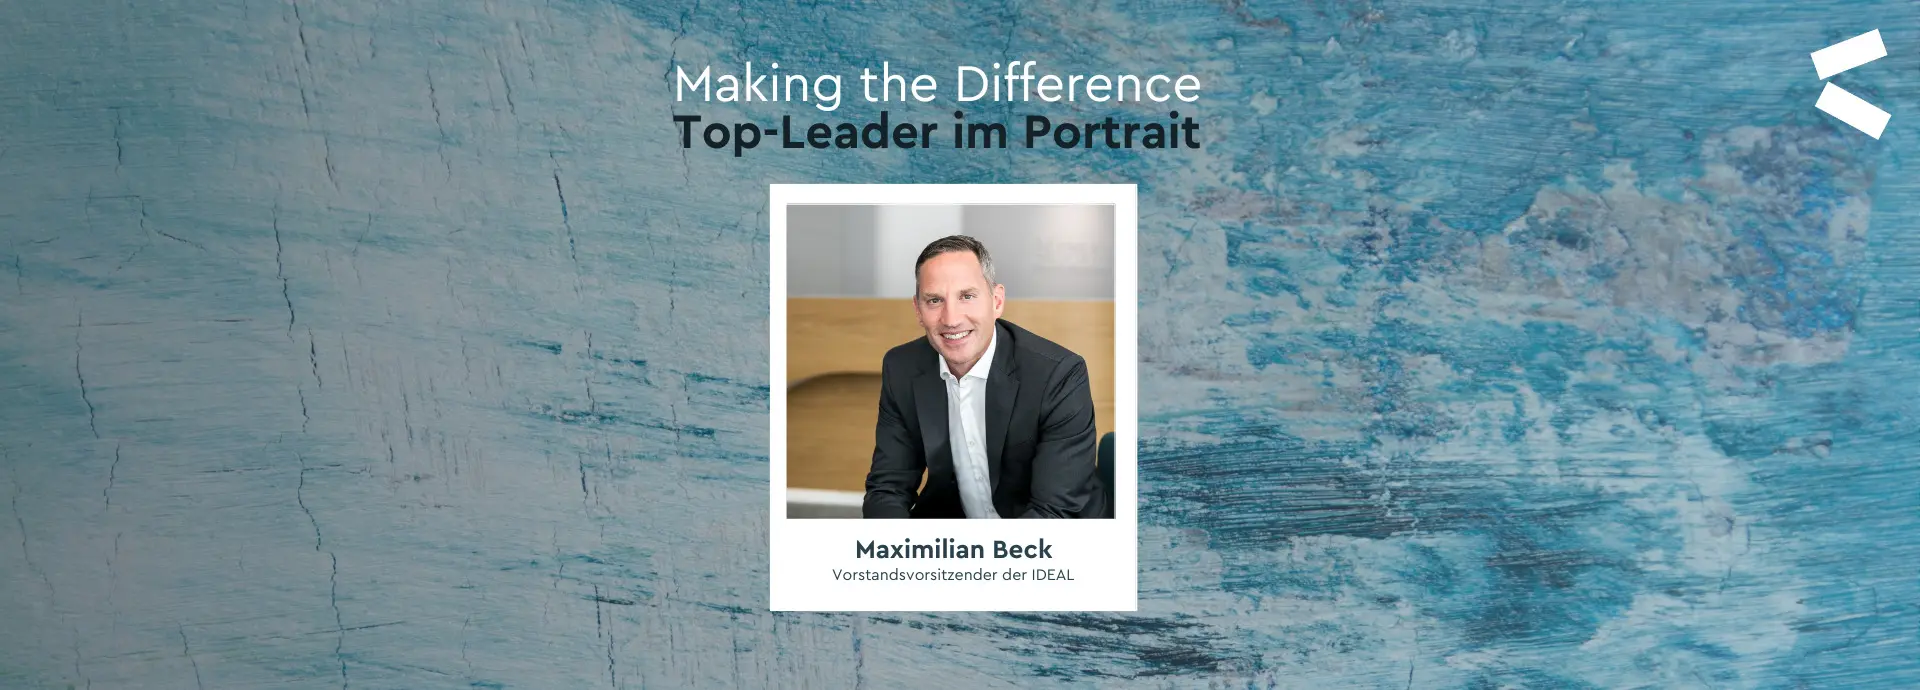 Making the Difference Maximilian Beck